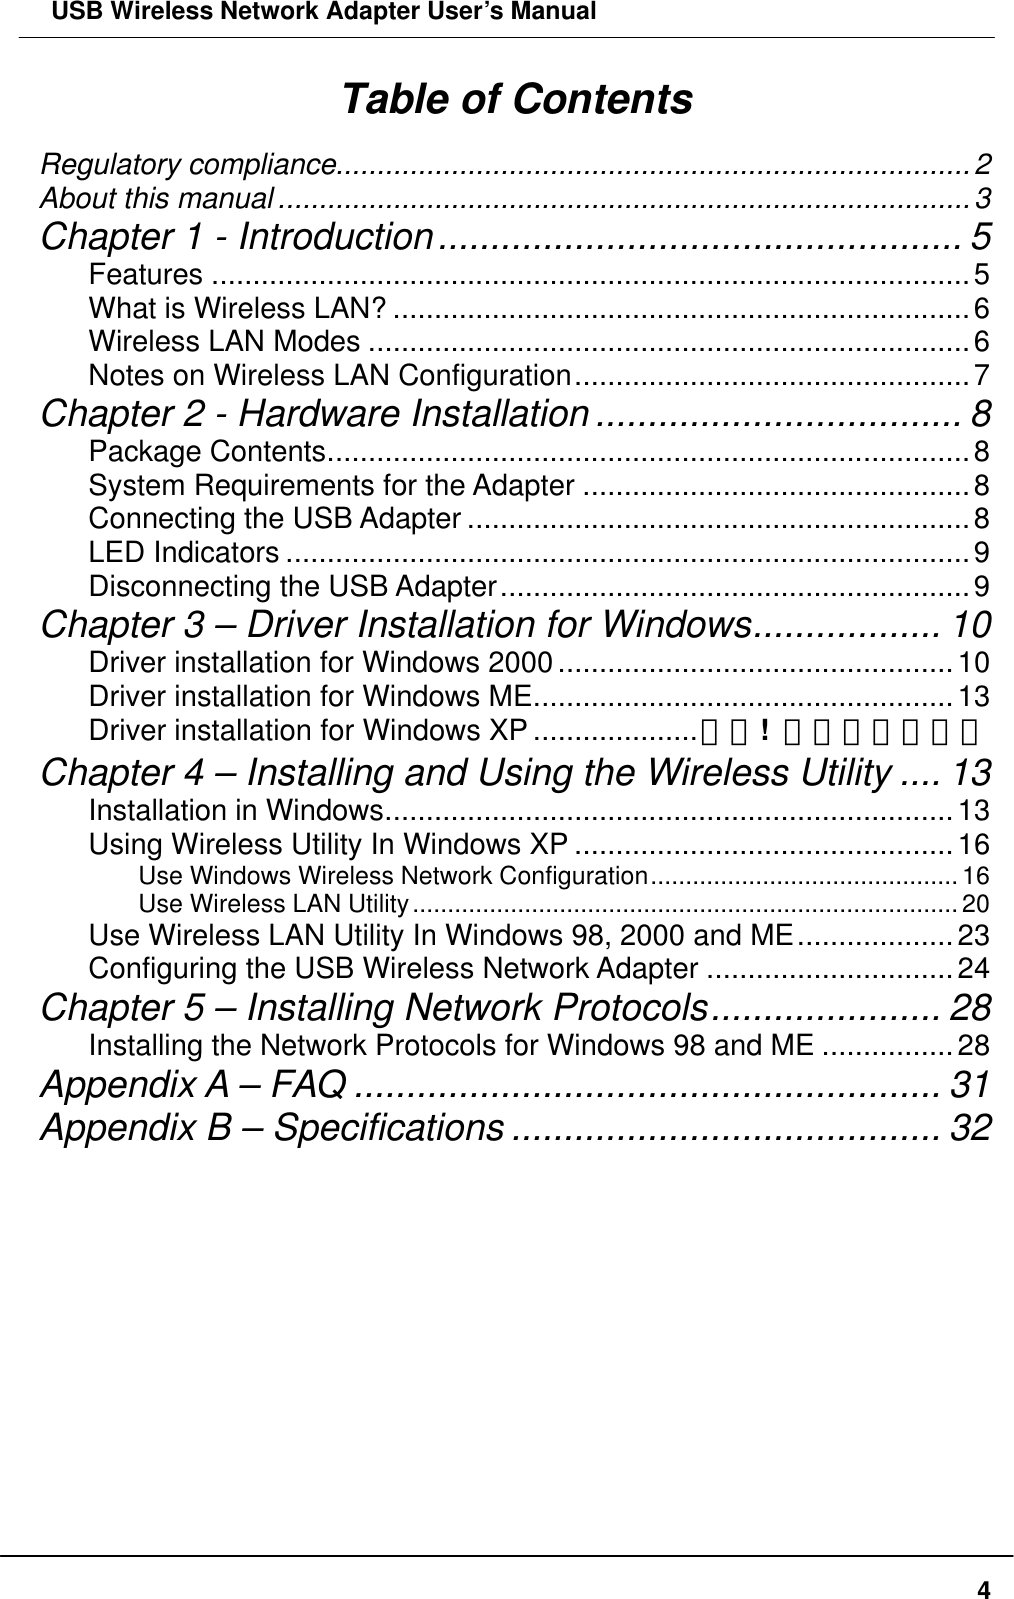  USB Wireless Network Adapter User’s Manual  4Table of Contents Regulatory compliance.............................................................................2 About this manual ....................................................................................3 Chapter 1 - Introduction.................................................. 5 Features ............................................................................................5 What is Wireless LAN? ......................................................................6 Wireless LAN Modes .........................................................................6 Notes on Wireless LAN Configuration................................................7 Chapter 2 - Hardware Installation ................................... 8 Package Contents..............................................................................8 System Requirements for the Adapter ...............................................8 Connecting the USB Adapter .............................................................8 LED Indicators ...................................................................................9 Disconnecting the USB Adapter.........................................................9 Chapter 3 – Driver Installation for Windows.................. 10 Driver installation for Windows 2000................................................10 Driver installation for Windows ME...................................................13 Driver installation for Windows XP ....................錯誤!  尚未定義書籤。 Chapter 4 – Installing and Using the Wireless Utility .... 13 Installation in Windows.....................................................................13 Using Wireless Utility In Windows XP ..............................................16 Use Windows Wireless Network Configuration............................................16 Use Wireless LAN Utility..............................................................................20 Use Wireless LAN Utility In Windows 98, 2000 and ME...................23 Configuring the USB Wireless Network Adapter ..............................24 Chapter 5 – Installing Network Protocols...................... 28 Installing the Network Protocols for Windows 98 and ME ................28 Appendix A – FAQ ........................................................ 31 Appendix B – Specifications ......................................... 32      